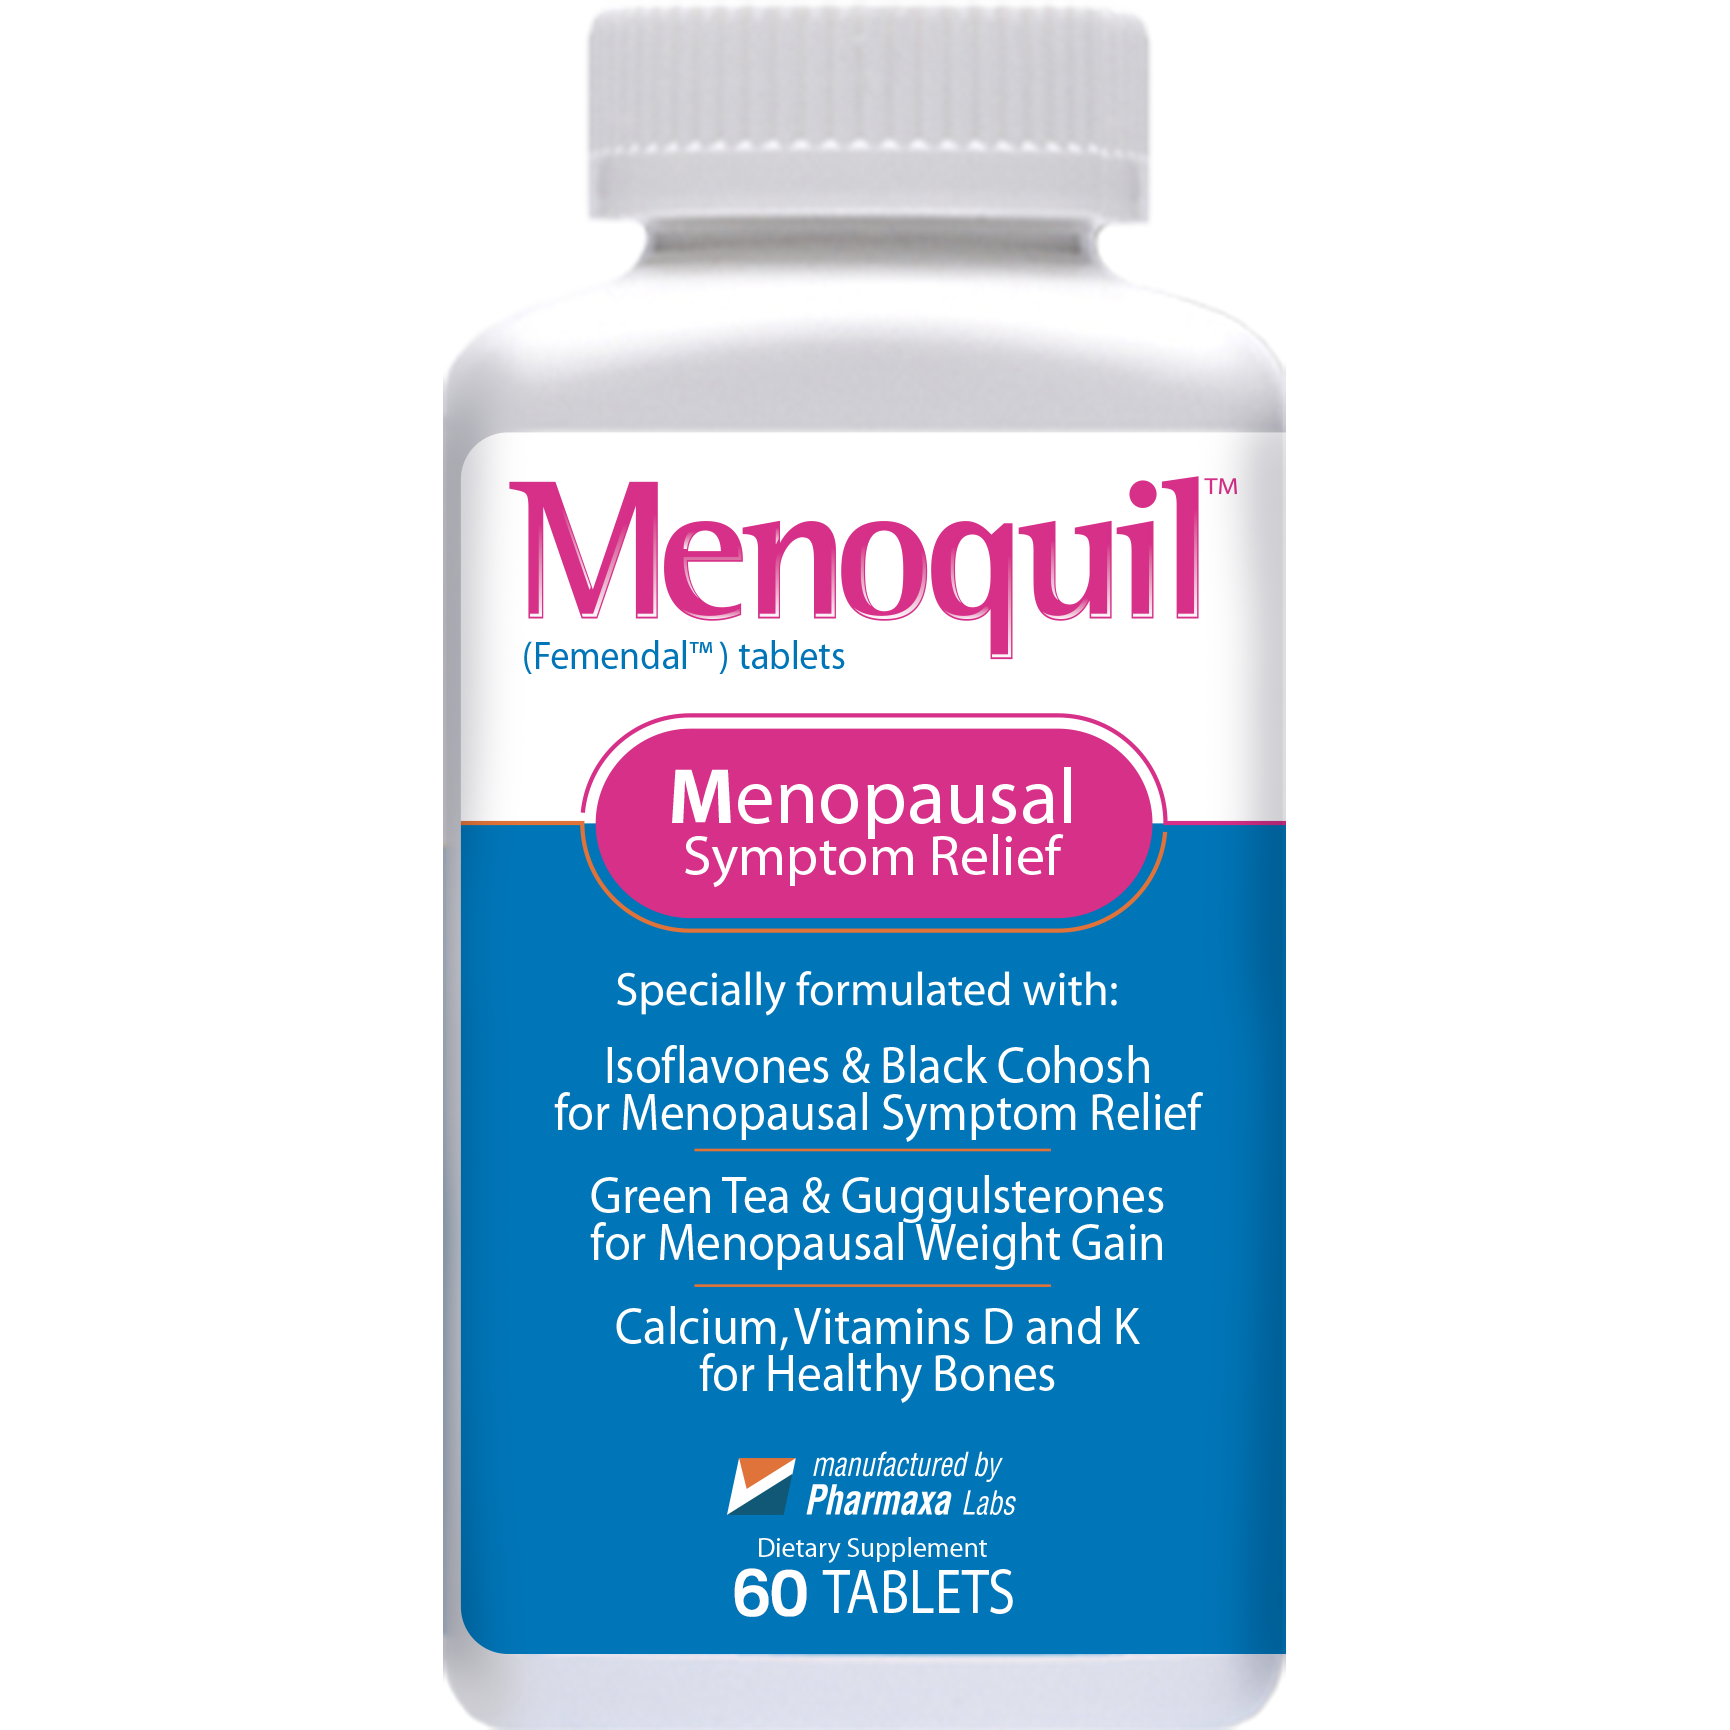 Menoquil 15 day quick start pack - Menoquil